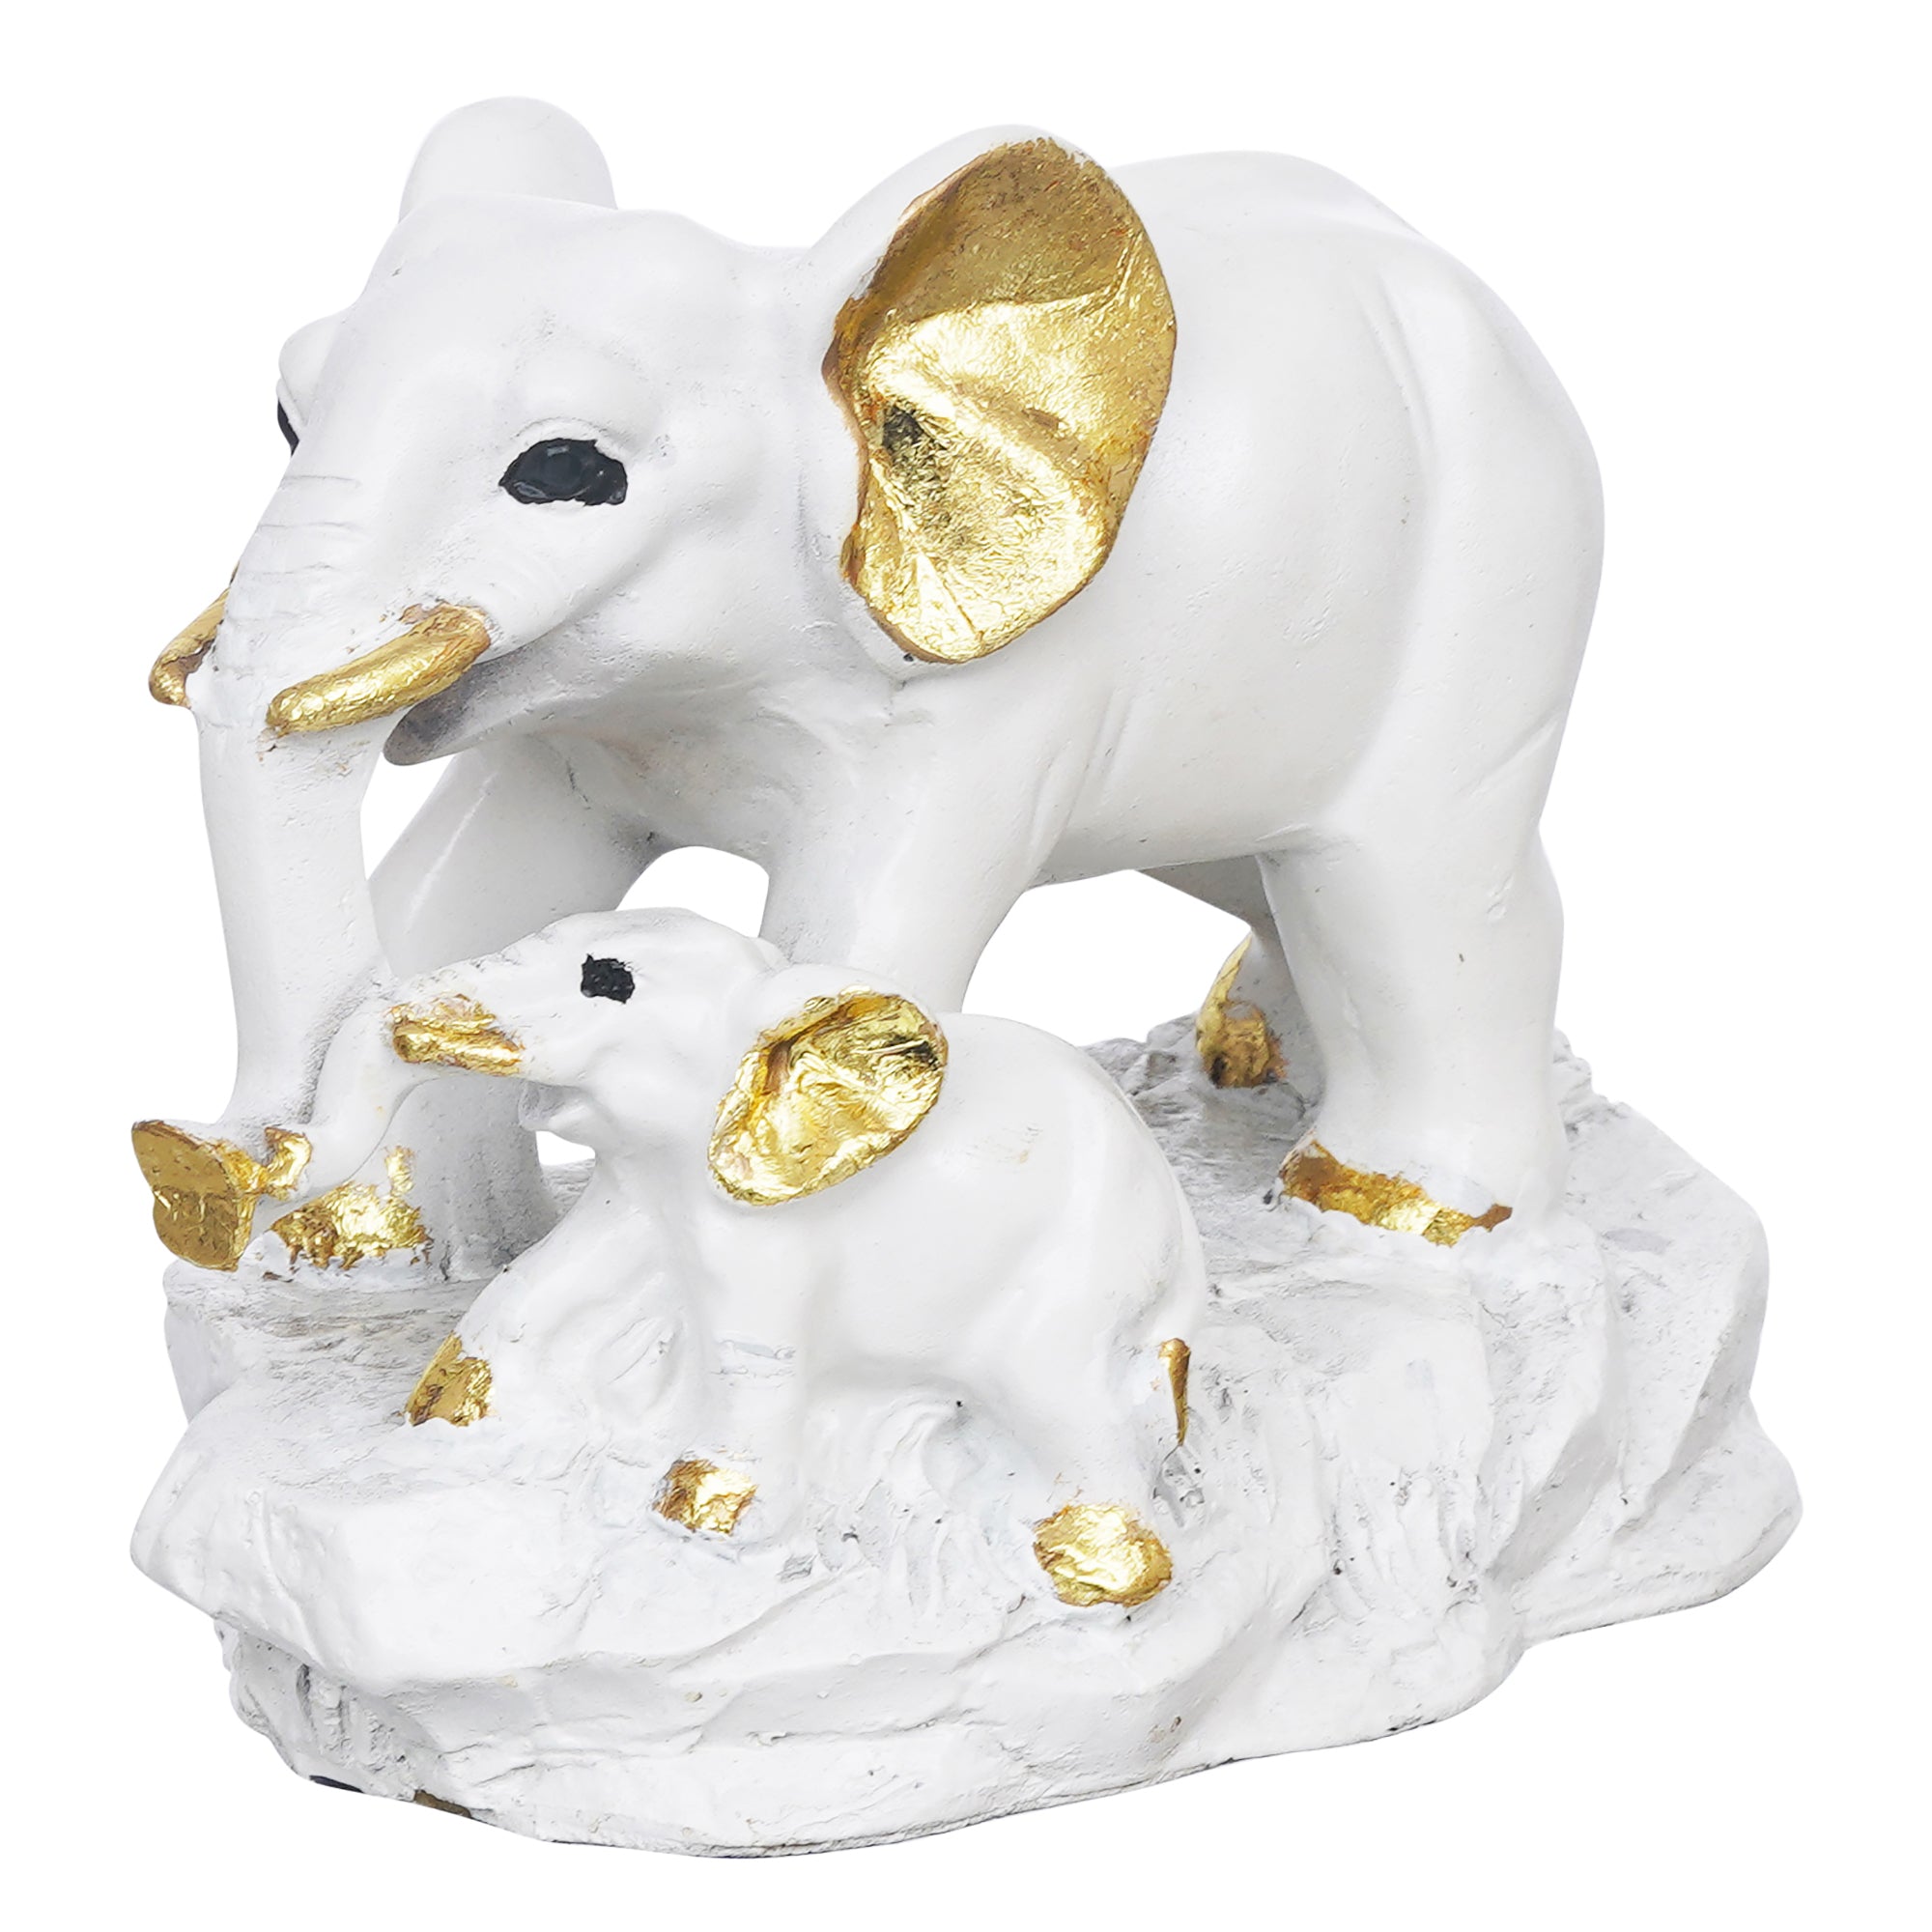 eCraftIndia White and Golden Cute Elephant with Baby Elephant Statues Animal Figurines Decorative Showpieces for Home Decor 7